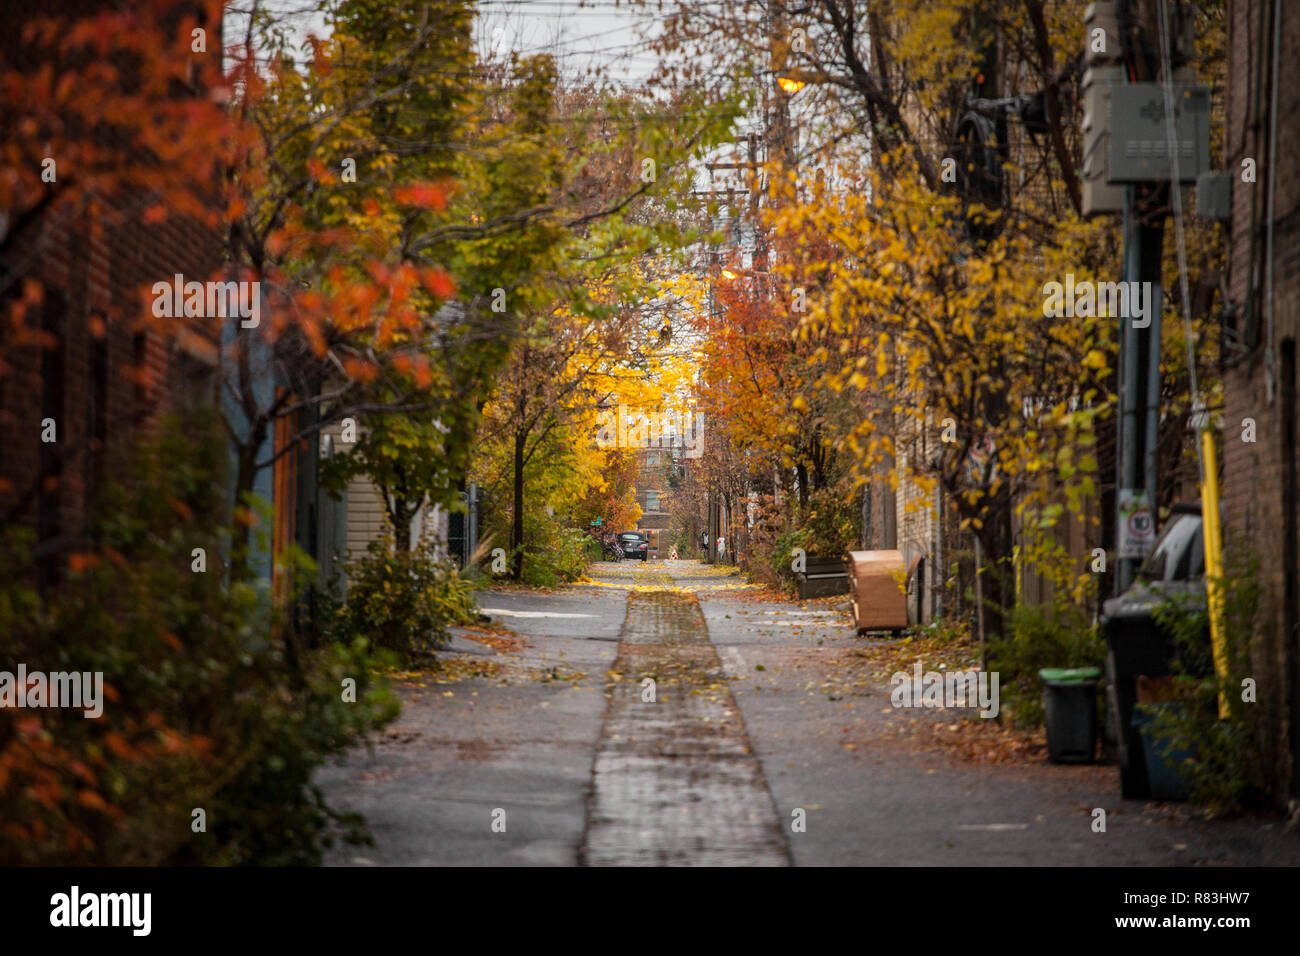 MONTREAL, CANADA - NOVEMBER 6, 2018: Dilapidated typical north American residential street in autumn in Montreal, Quebec, during a rainy day, red and  Stock Photo